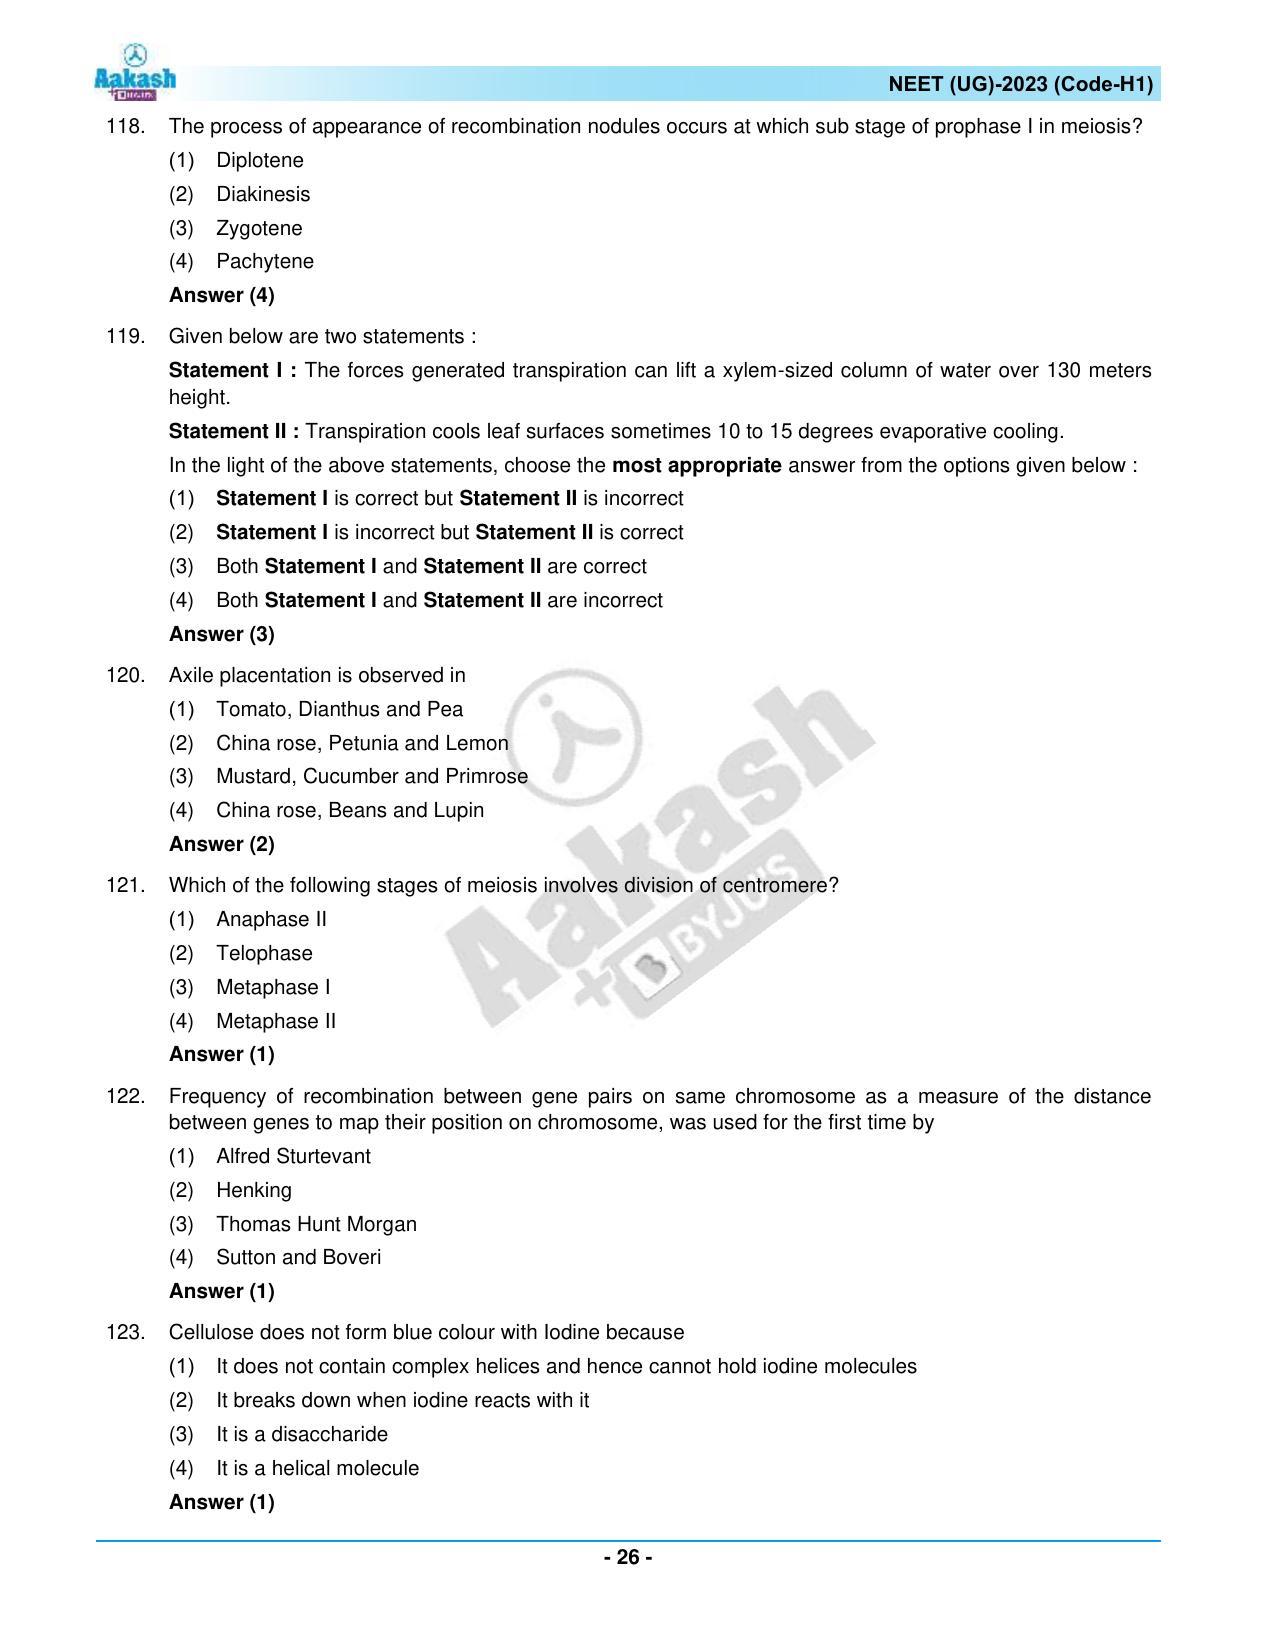 NEET 2023 Question Paper H1 - Page 26